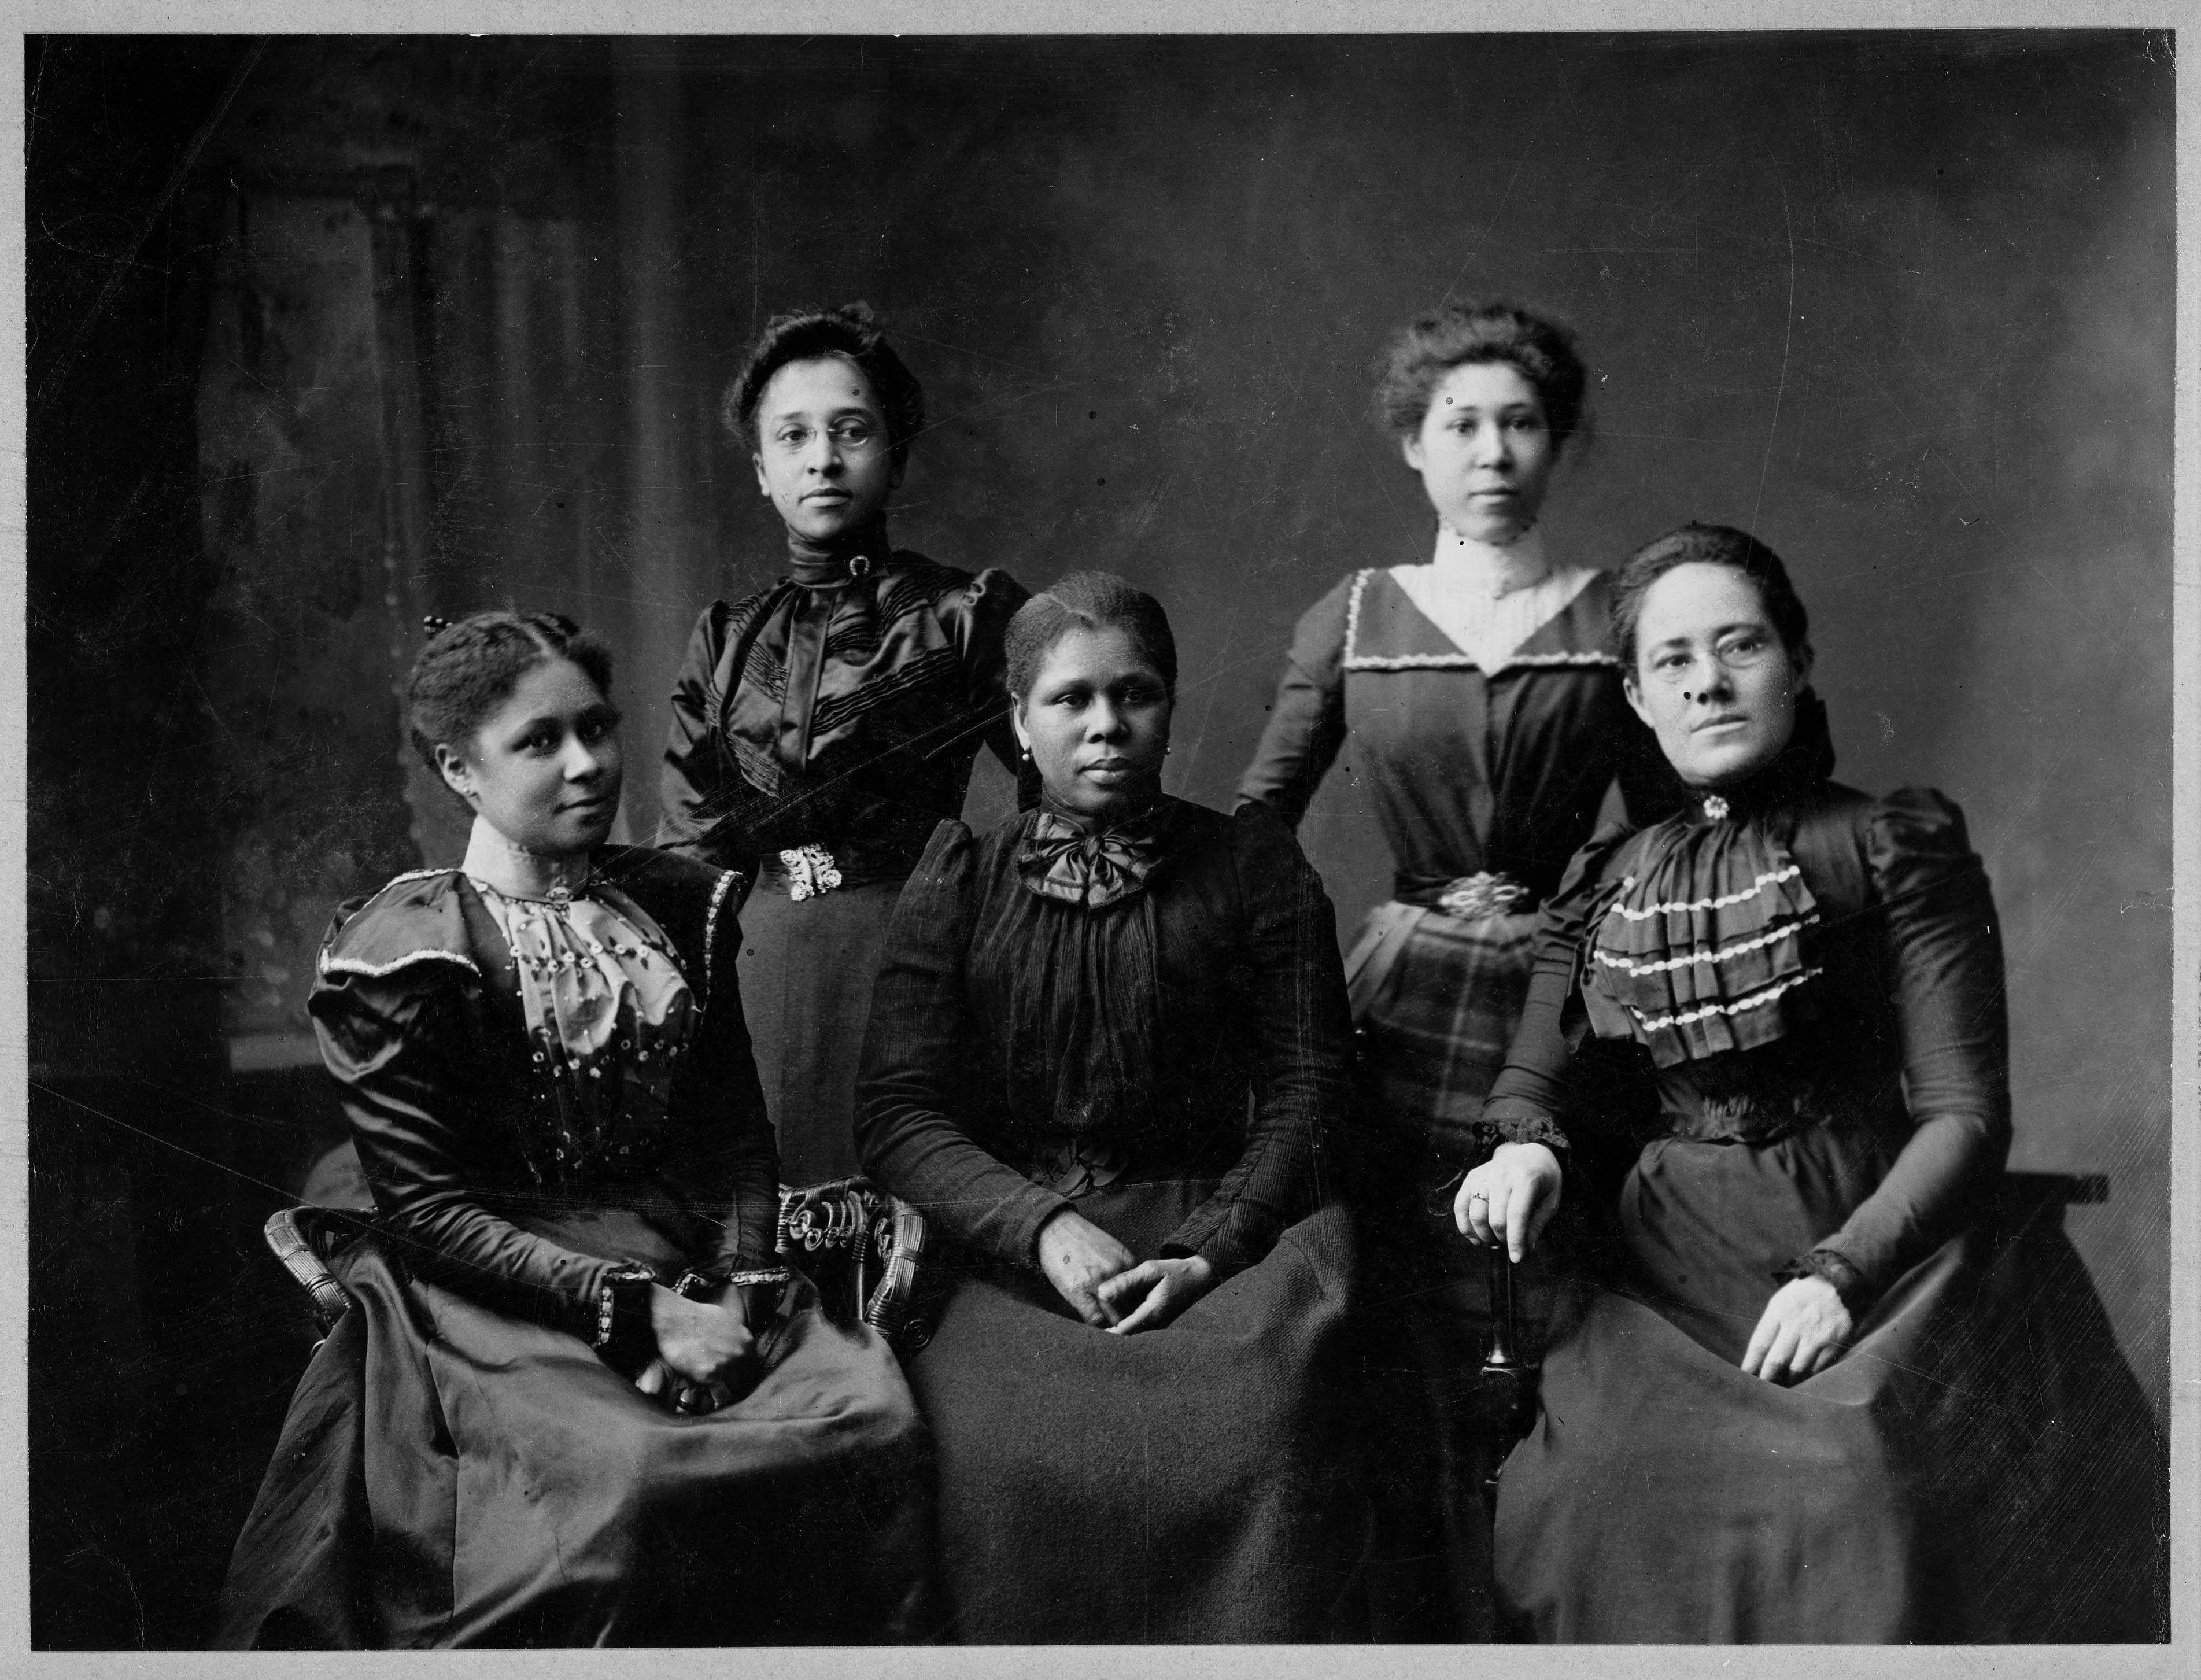 A black and white portrait of 4 Black women in a studio. Each is wearing a dark dress with their hair pinned back.